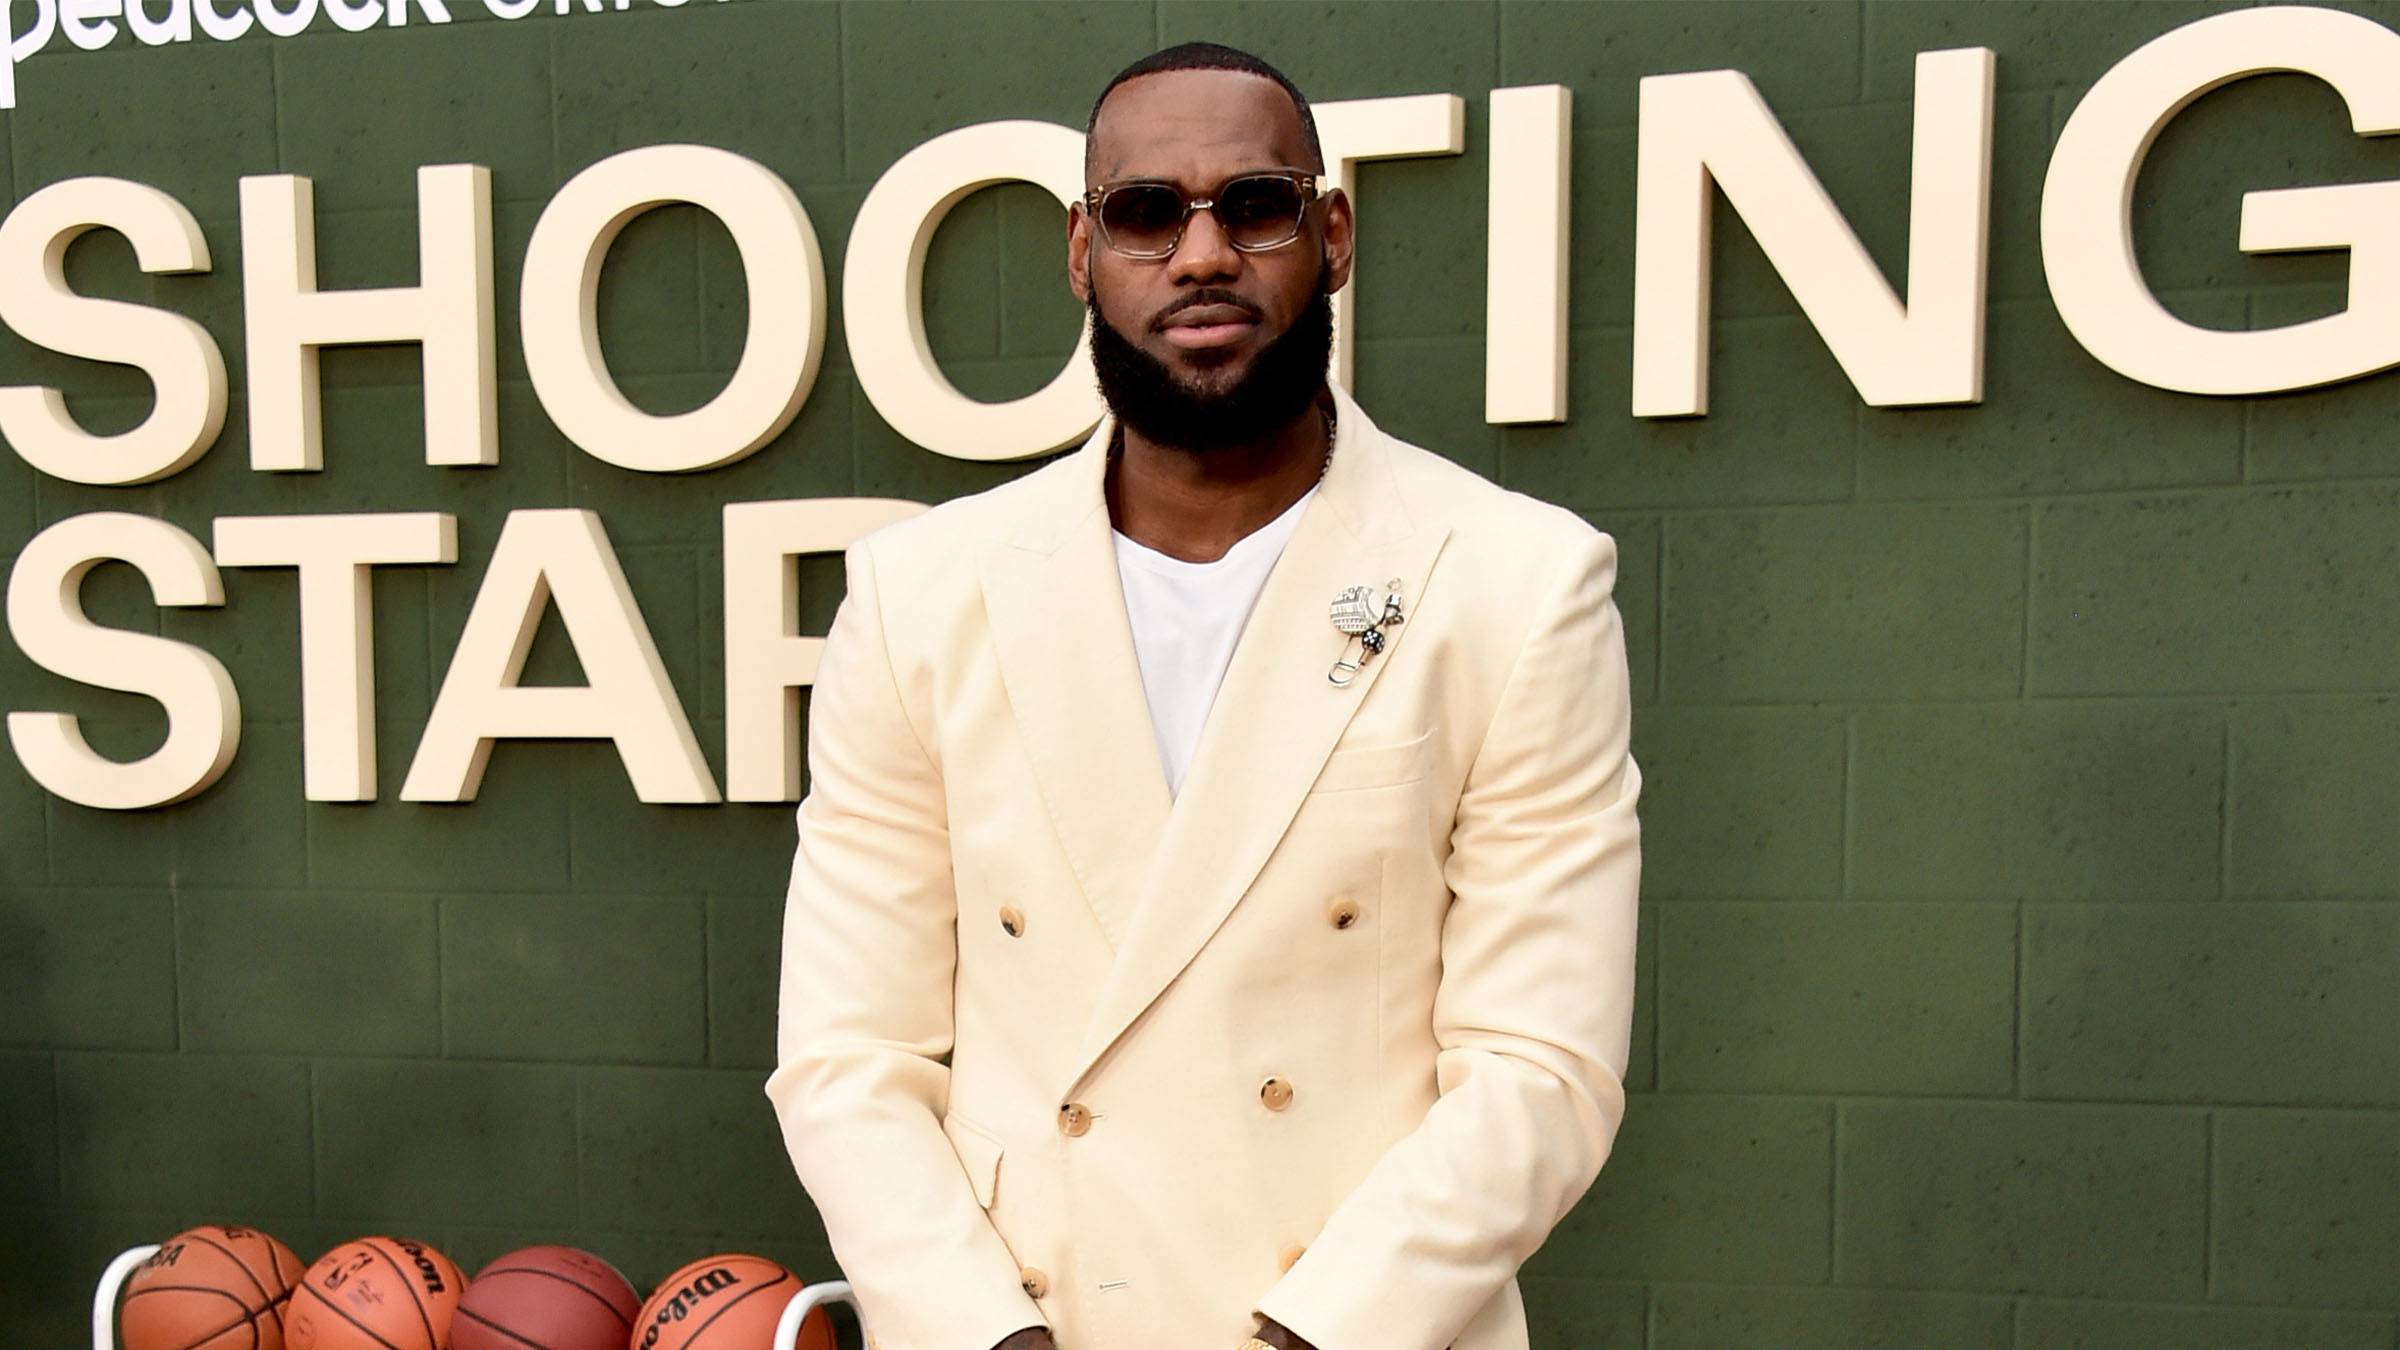 LeBron James Sports $28K Louis Vuitton Fit During Opening Night of